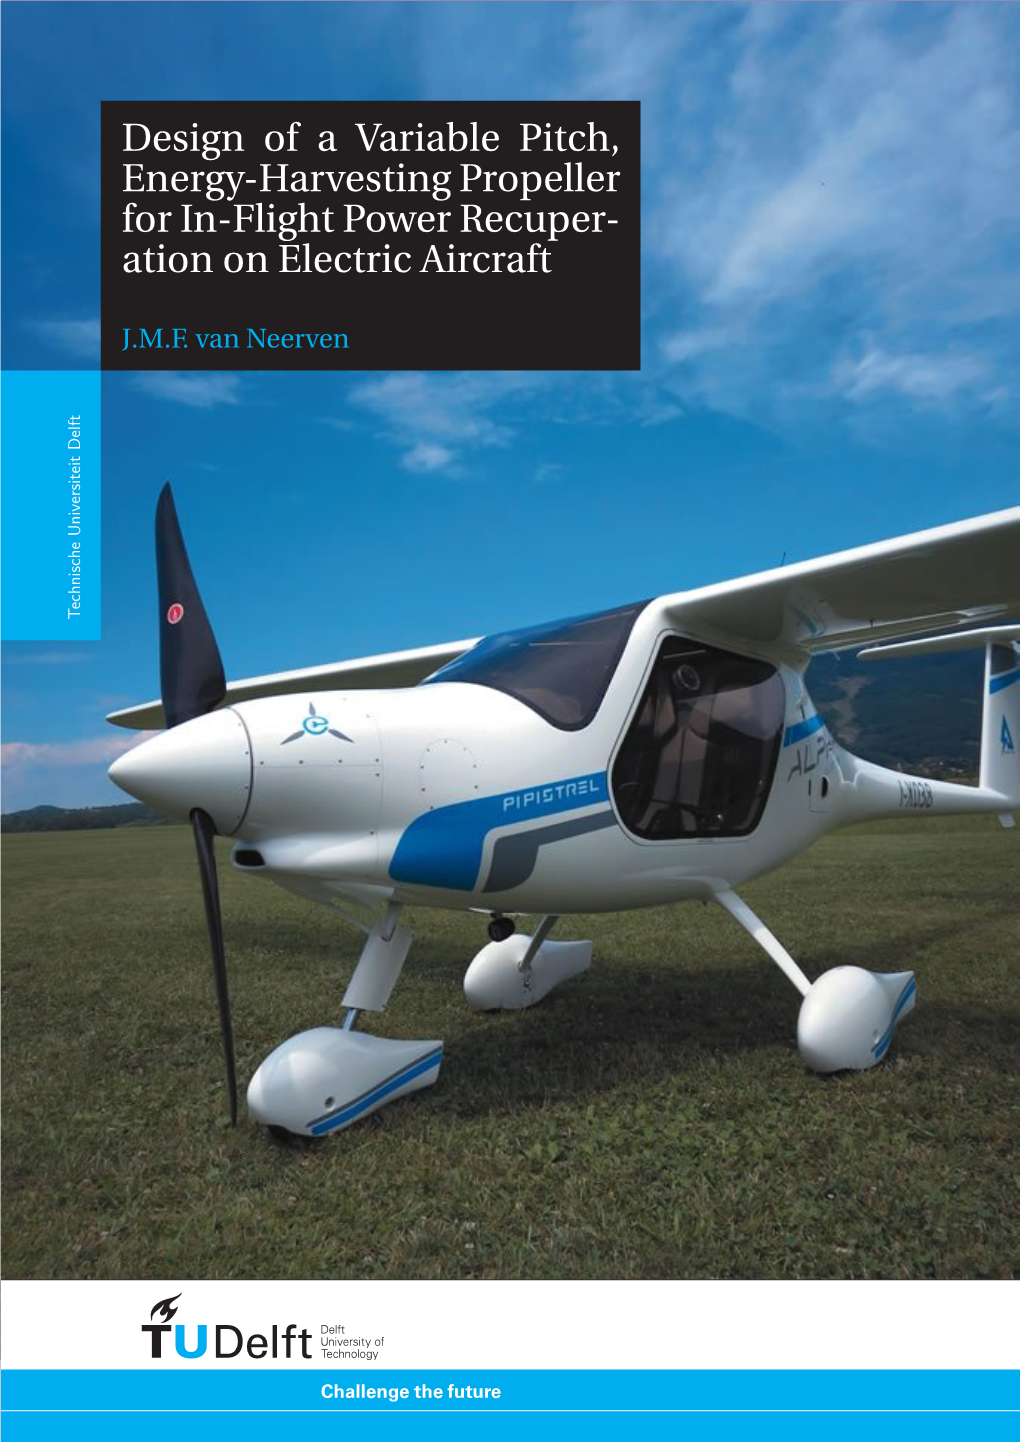 Design of a Variable Pitch, Energy-Harvesting Propeller for In-Flight Power Recuper- Ation on Electric Aircraft